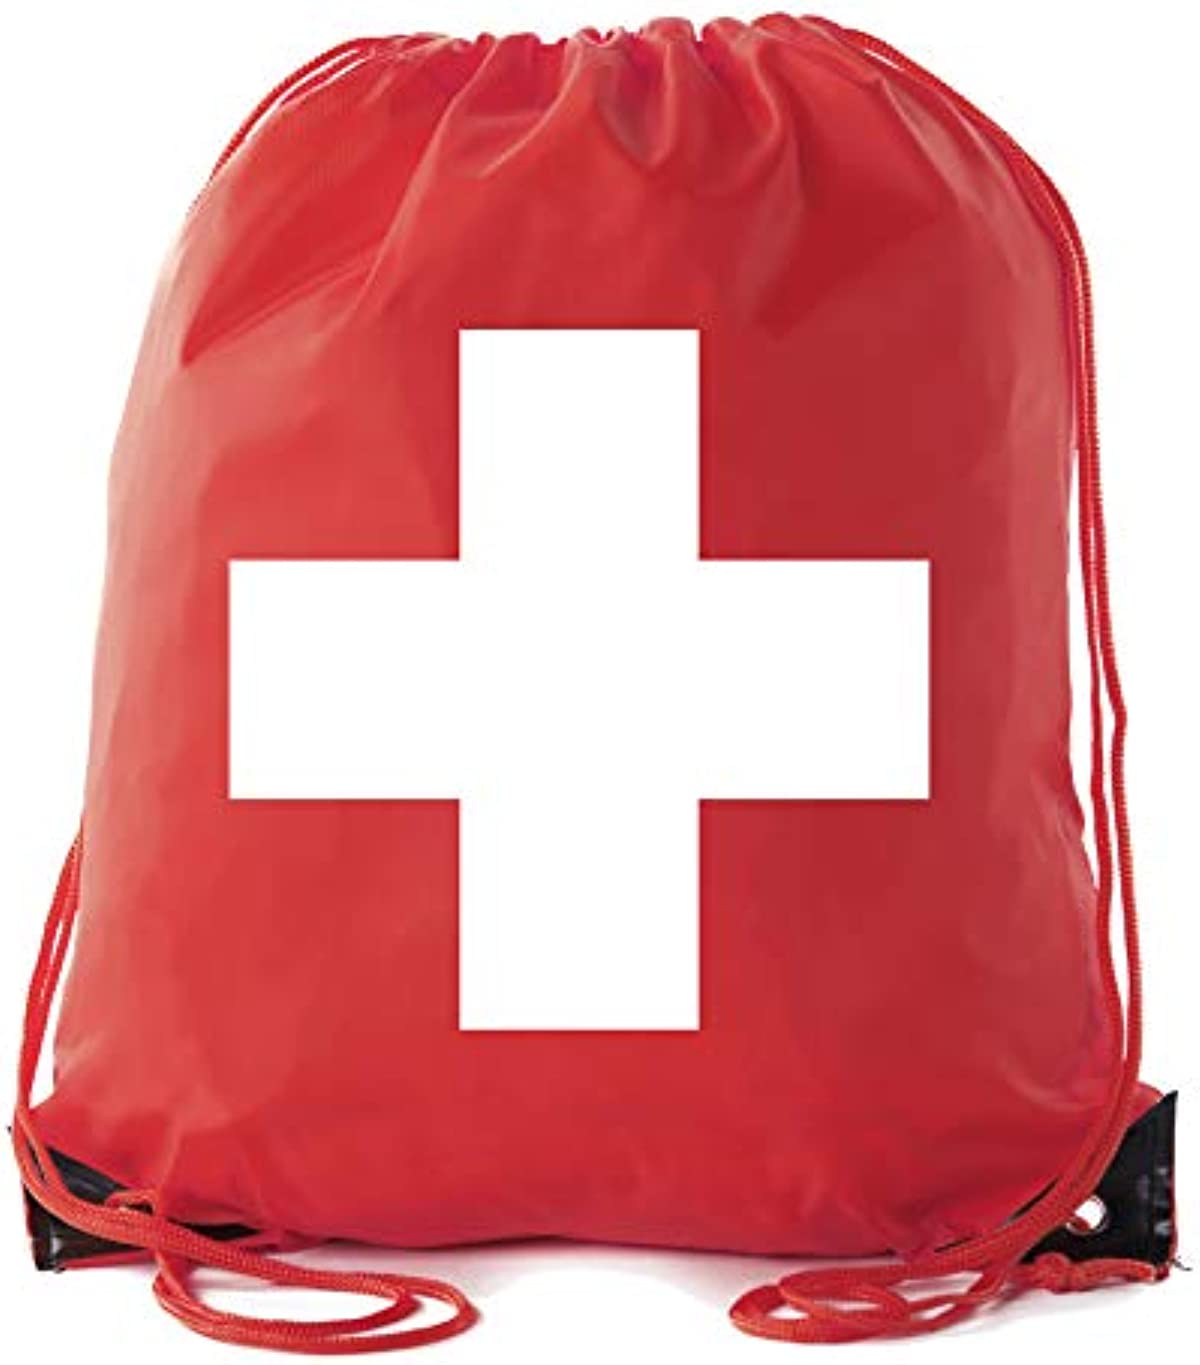 First Aid Backpack Drawstring Medical Bag for Emergencies or Epi Pen & Medicine - 6PK Red CA2500FirstAid S5